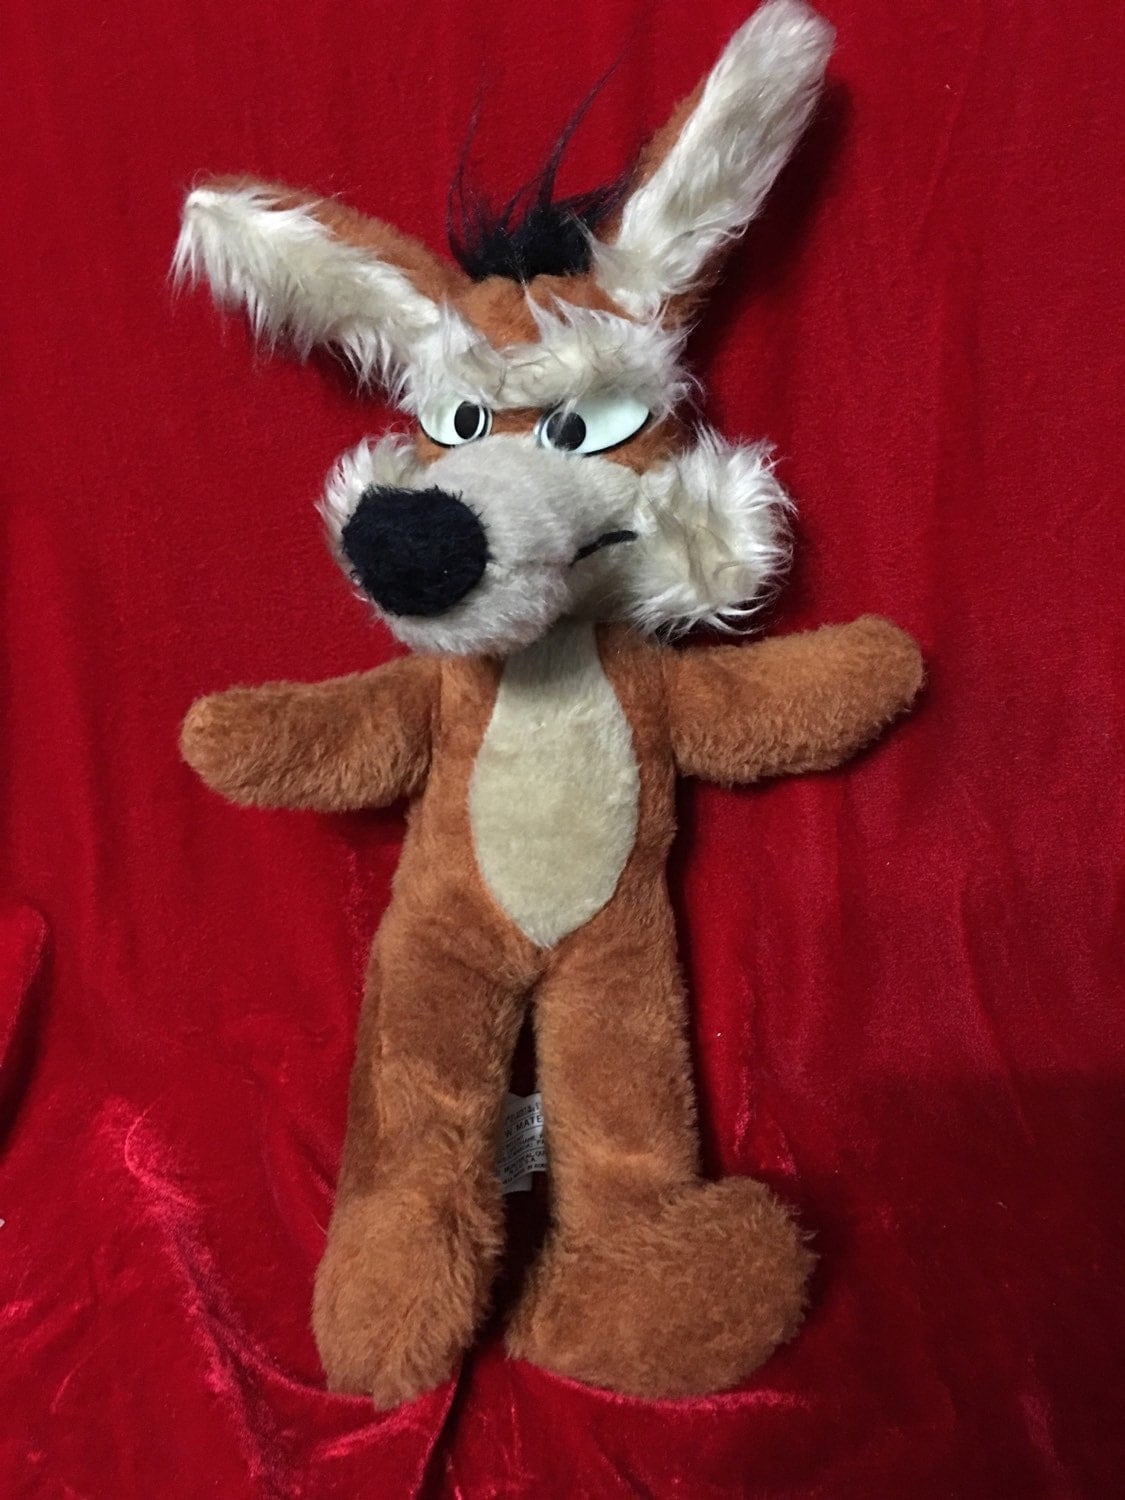 Vintage 70's Wile E Coyote Plush Toy By Warner Bros